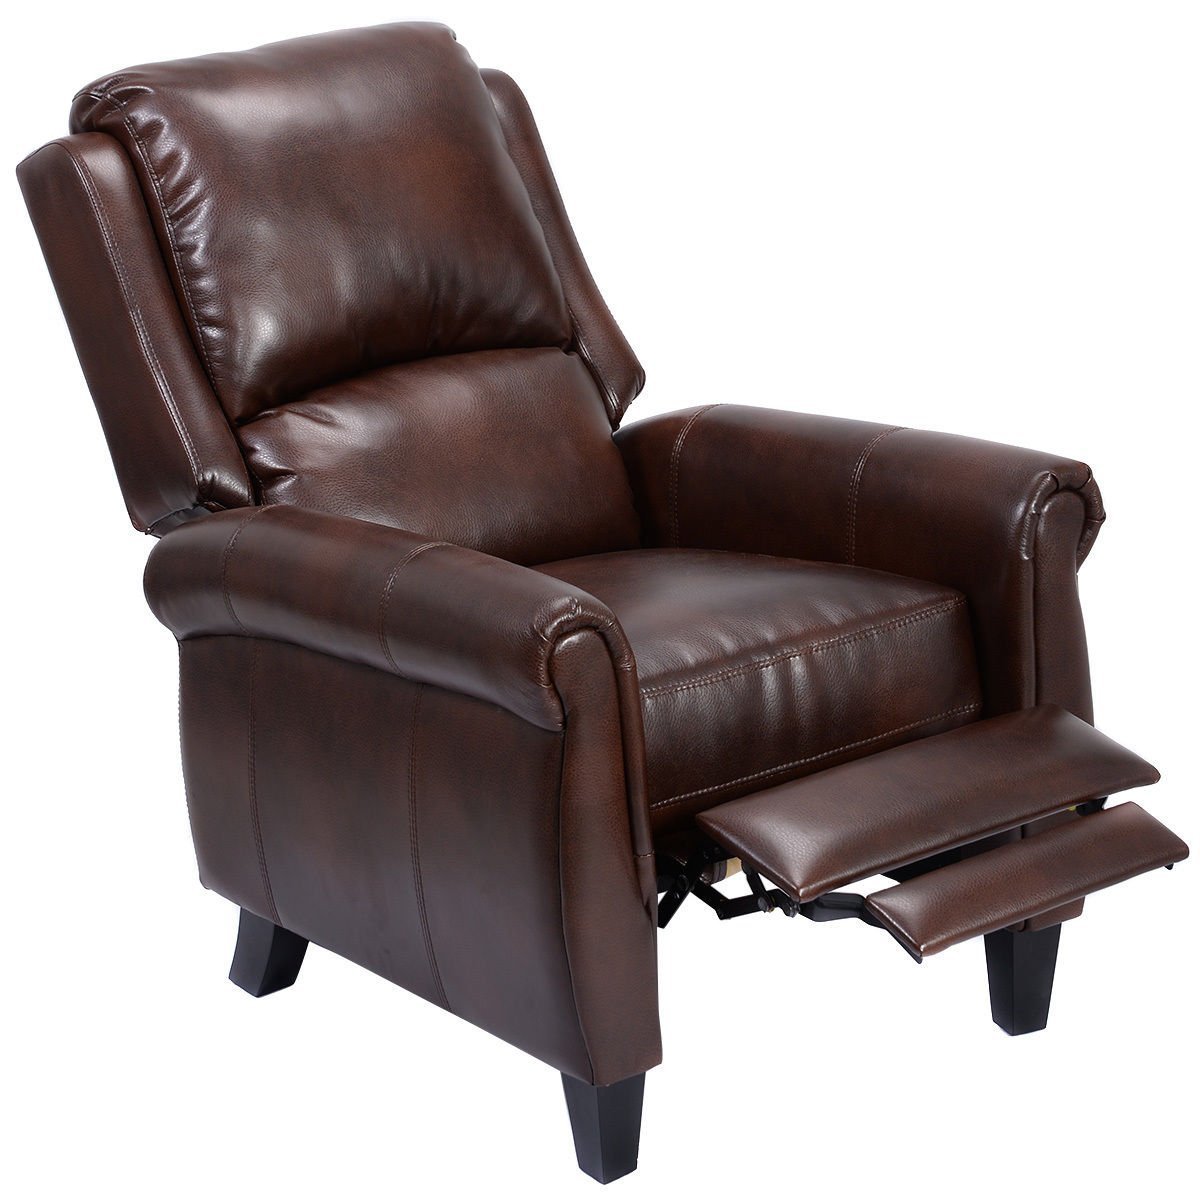 Giantex PU Leather Recliner Chair Push Back Club Living Room Seat Furniture w/Footrest (Brown)